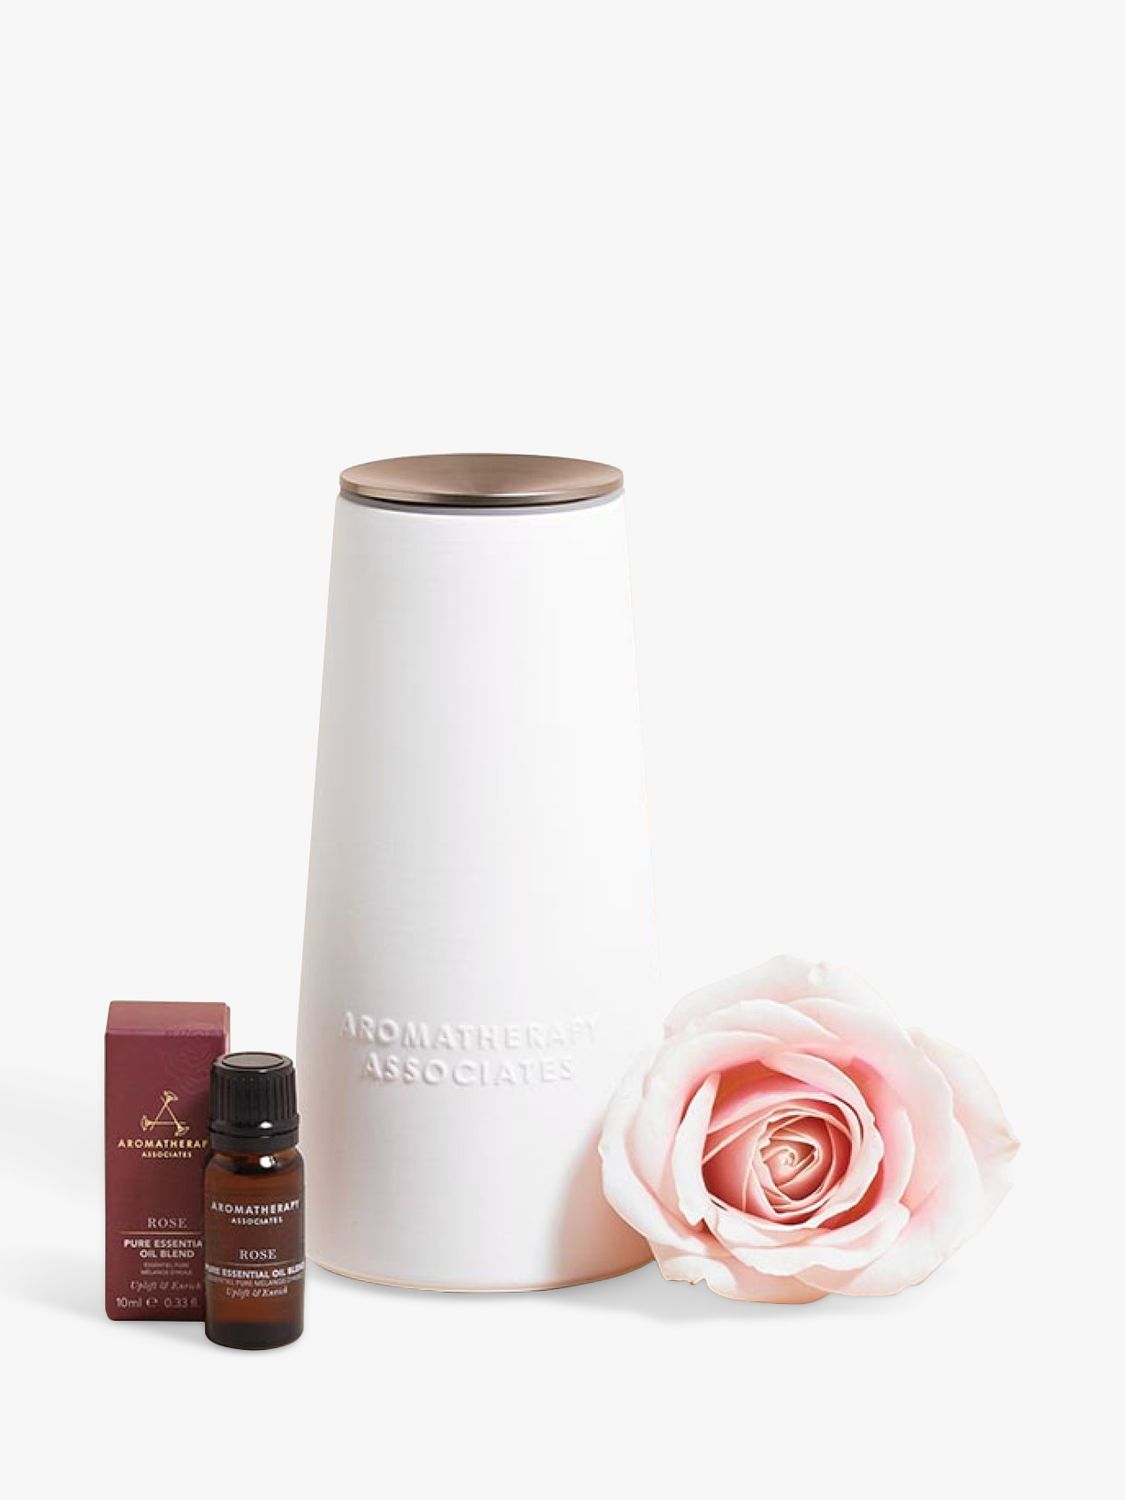 Aromatherapy Associates Rose Pure Essential Oil Blend, 10ml 4